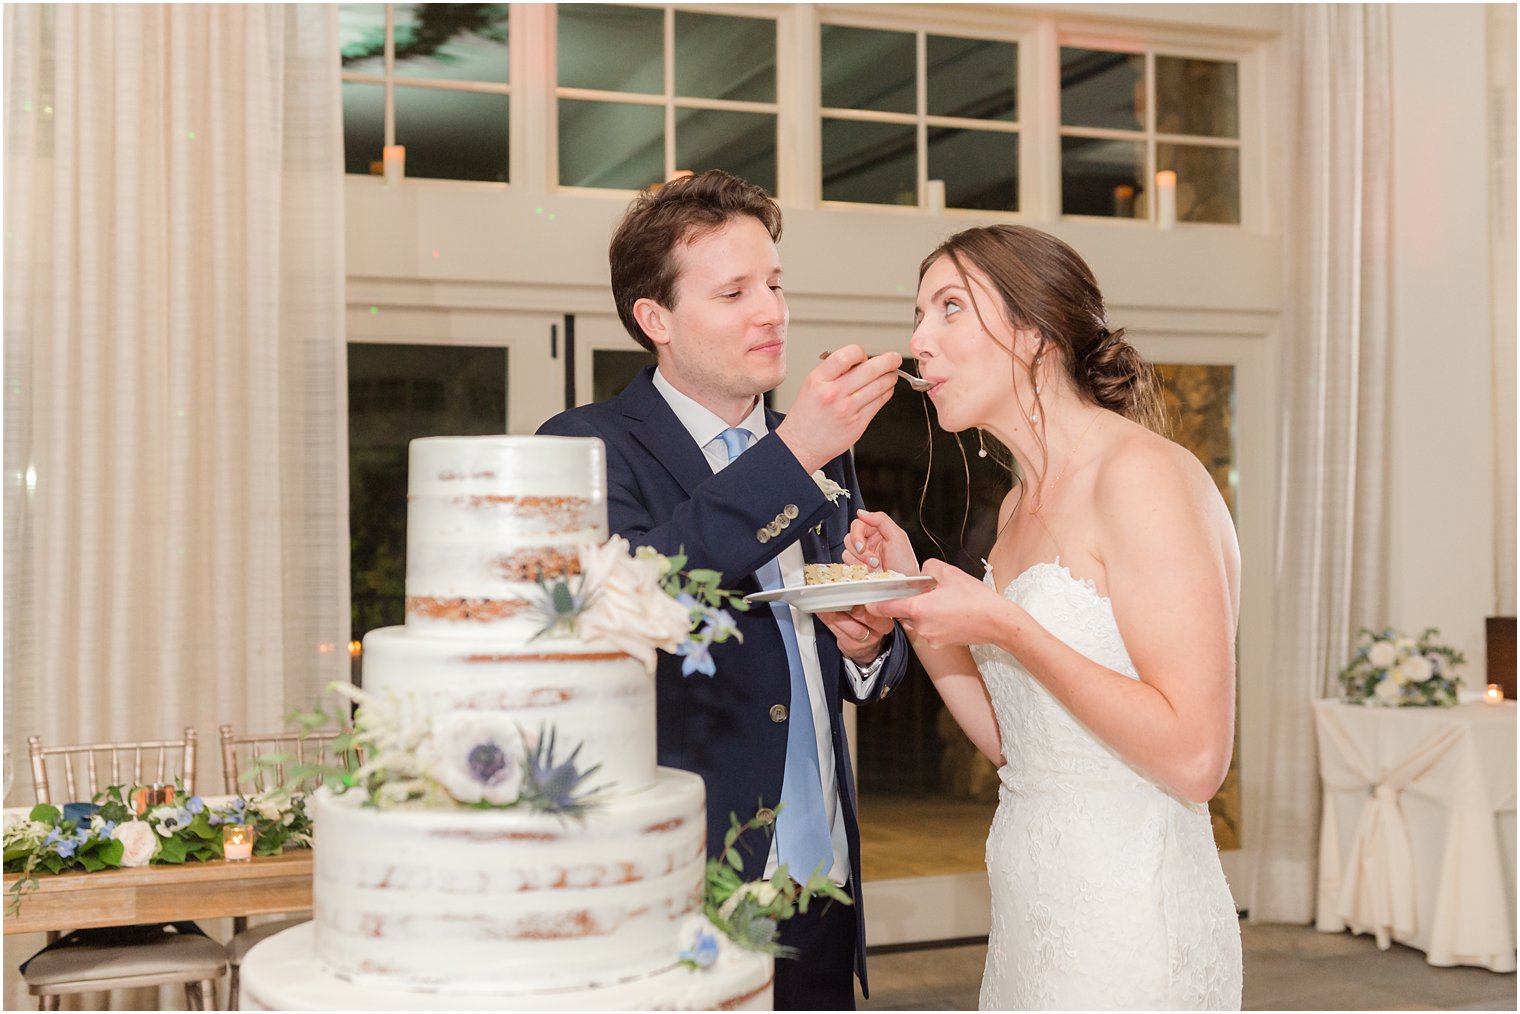 bride and groom cut naked wedding cake during spring wedding reception